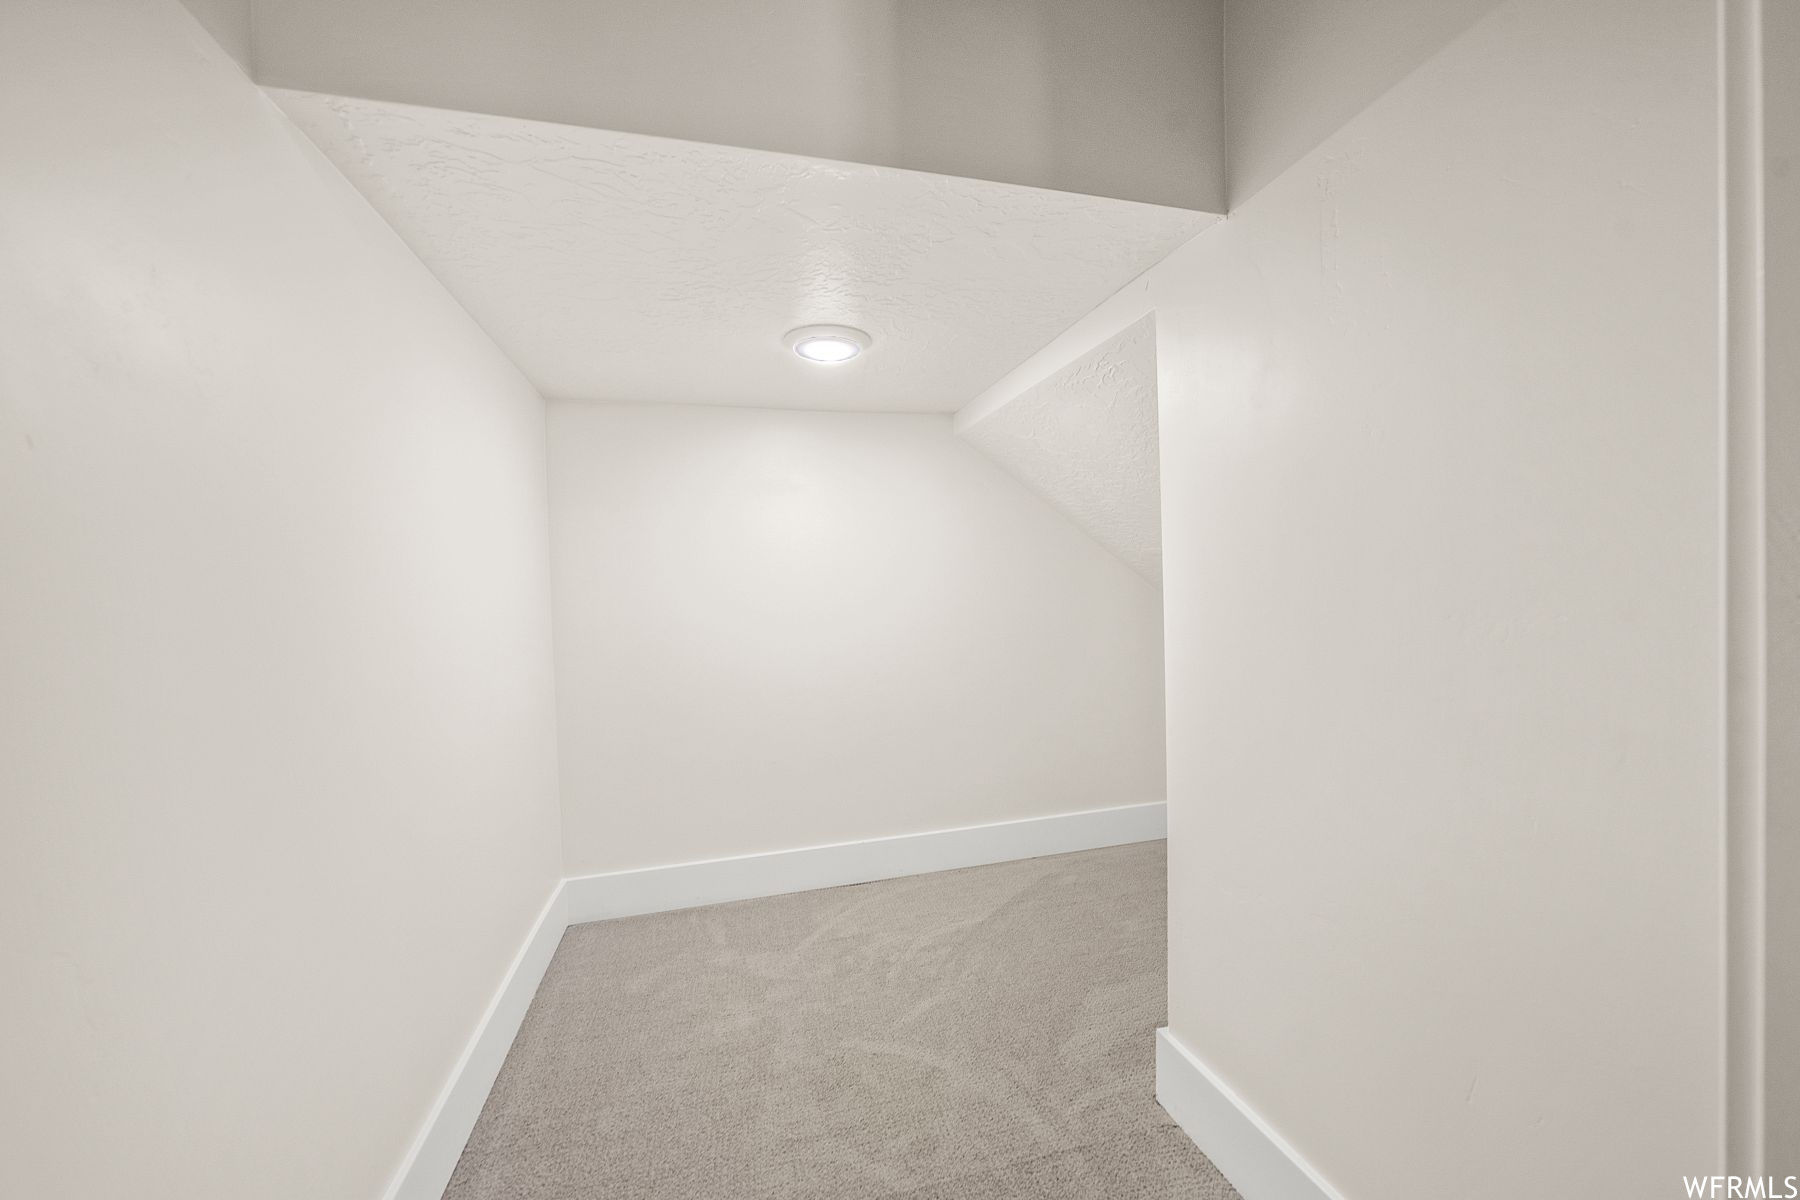 Carpeted spare room with lofted ceiling and a textured ceiling